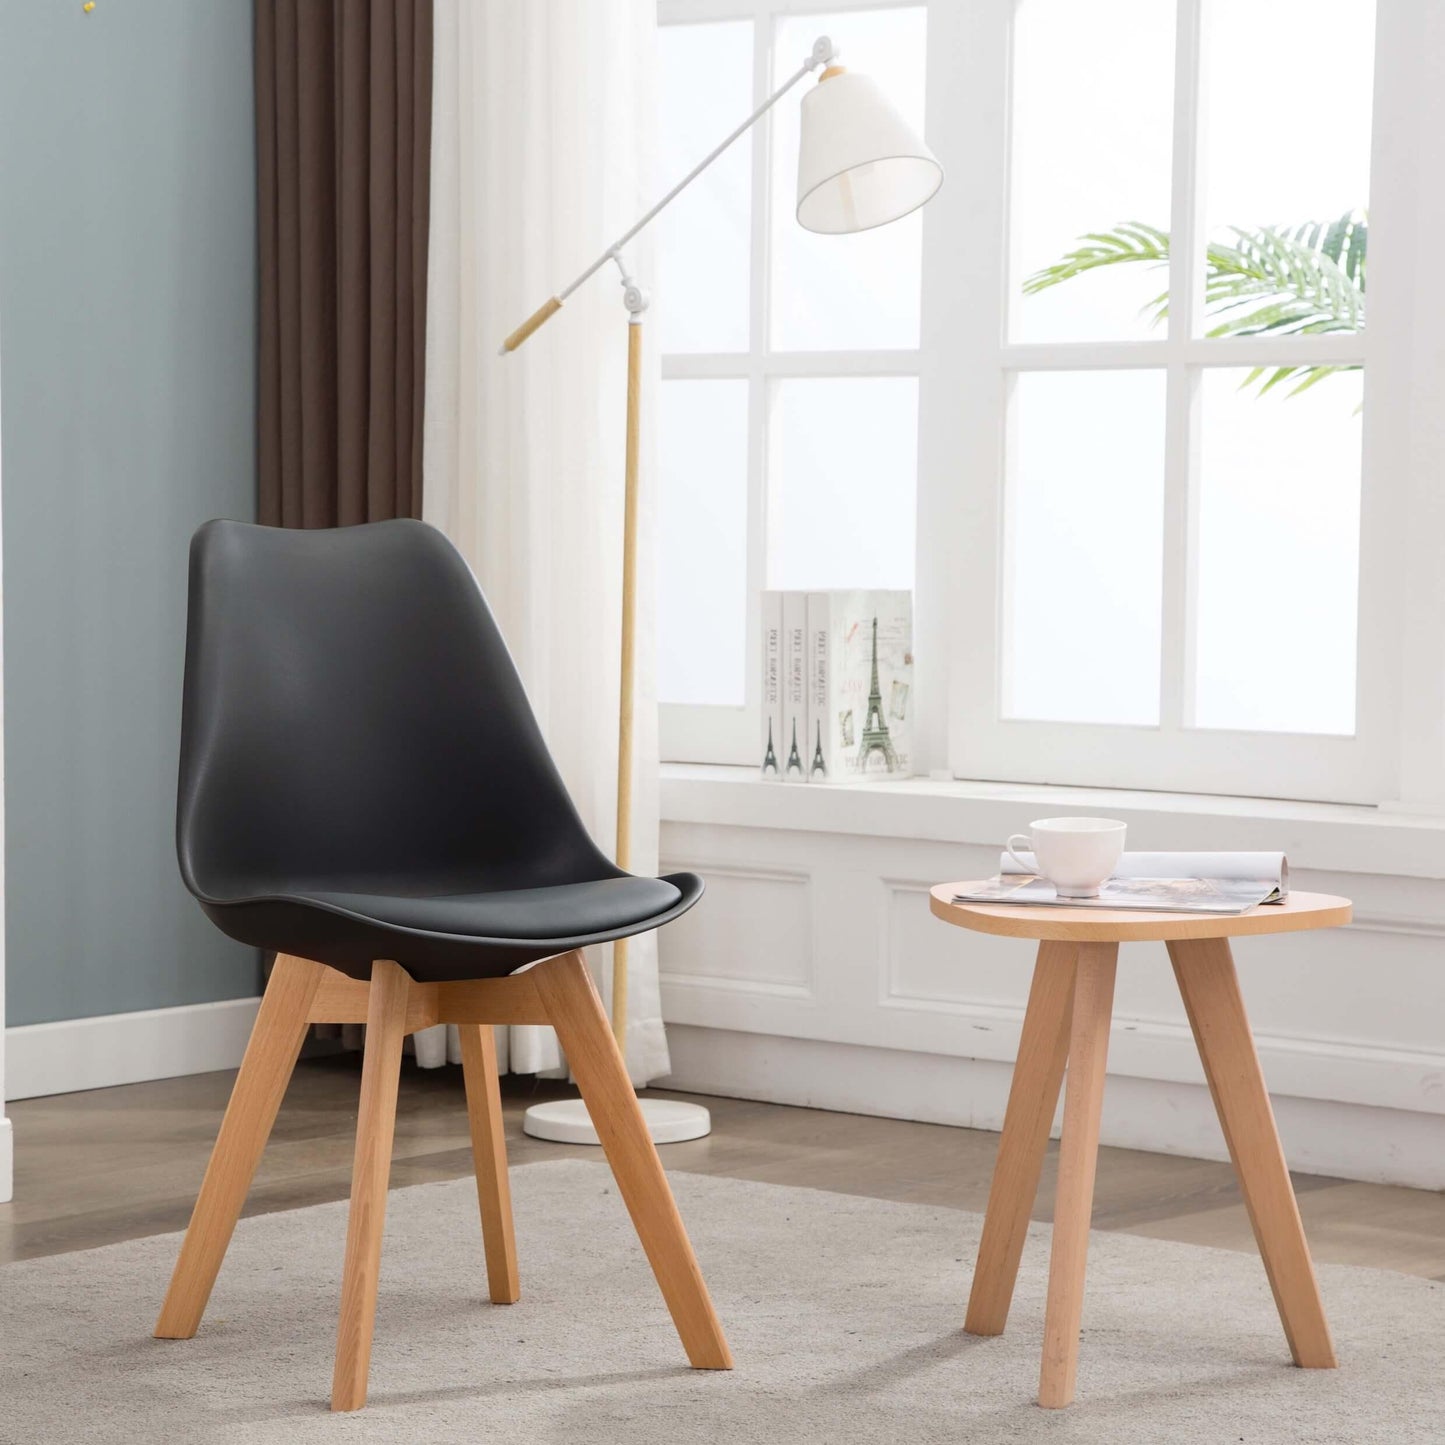 Ando Dining Chairs - Black x 2 - Chotto Furniture